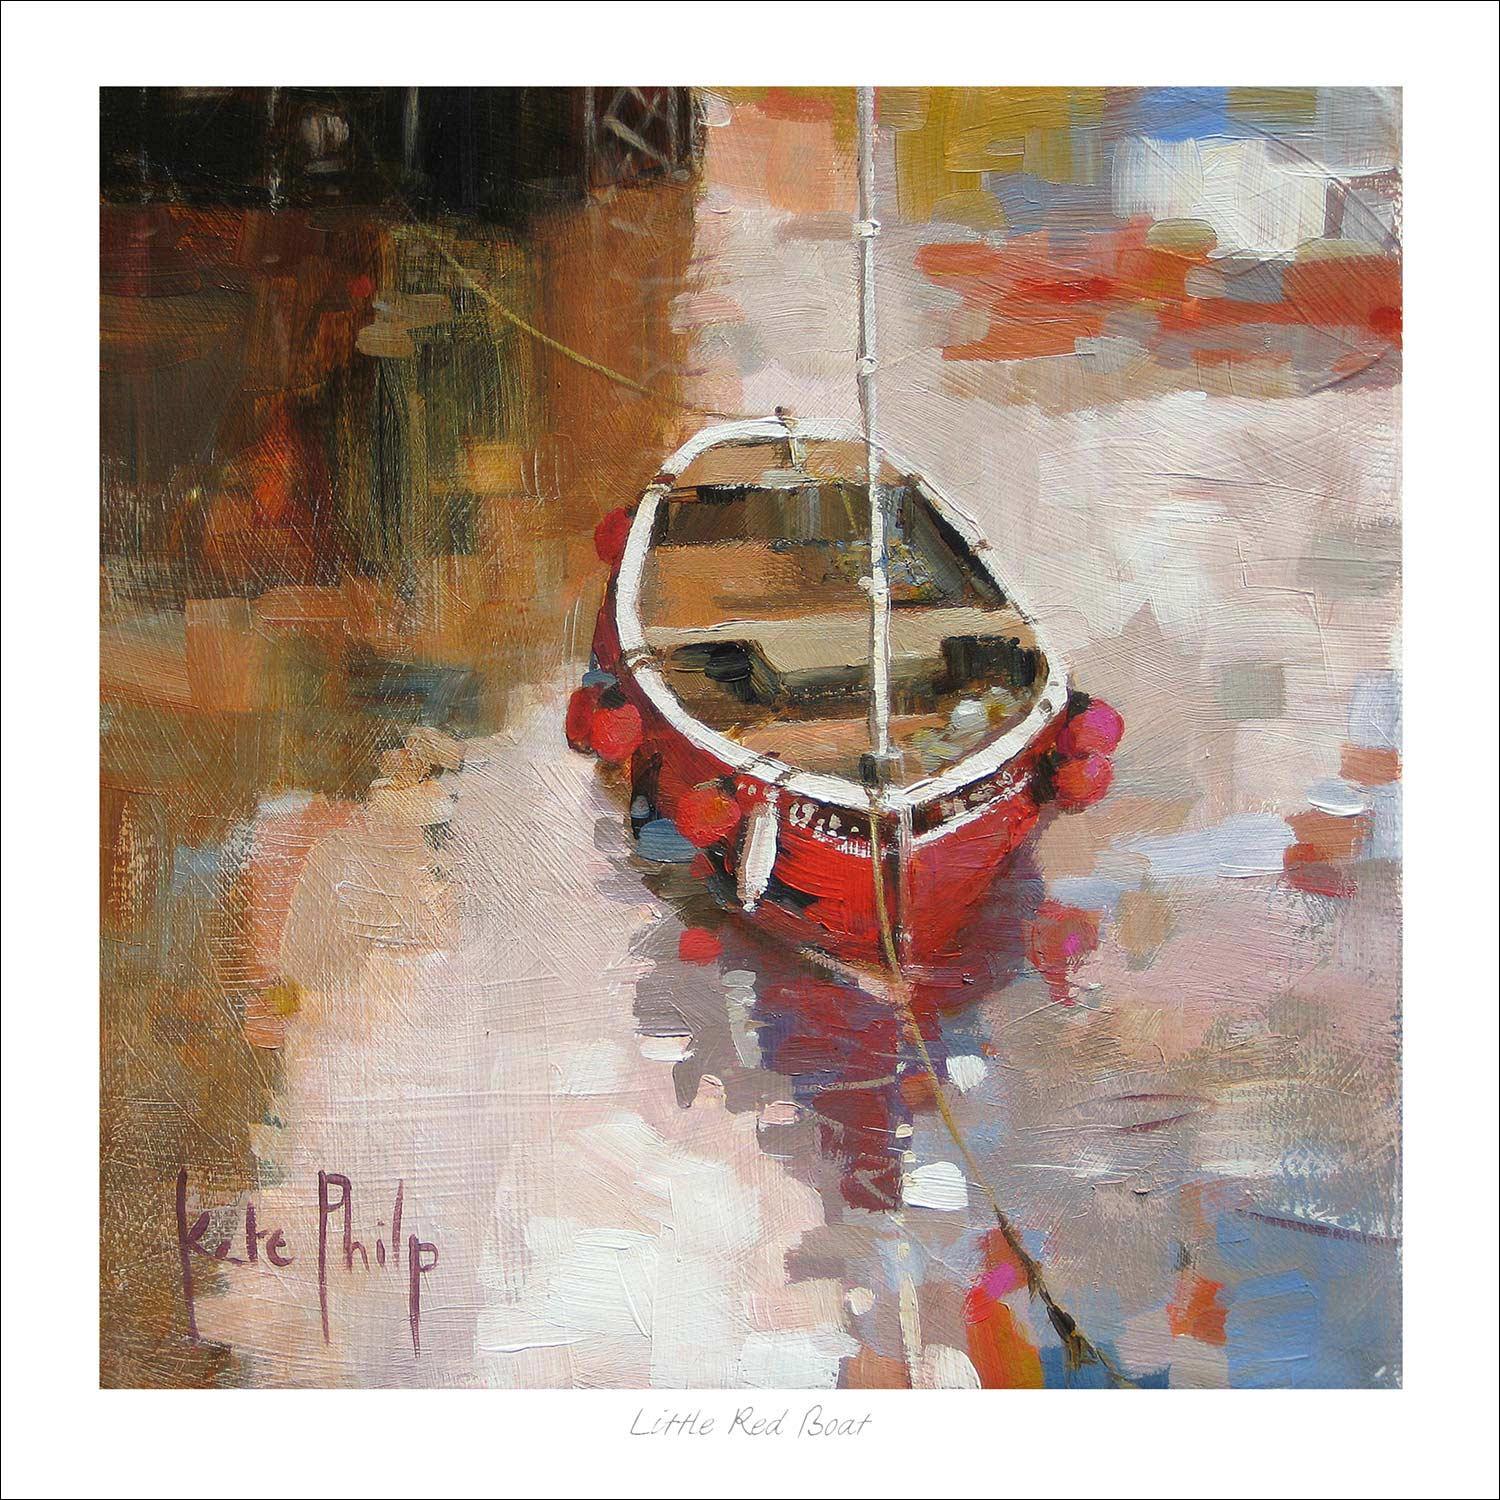 Little Red Boat Art Print from an original painting by artist Kate Philp